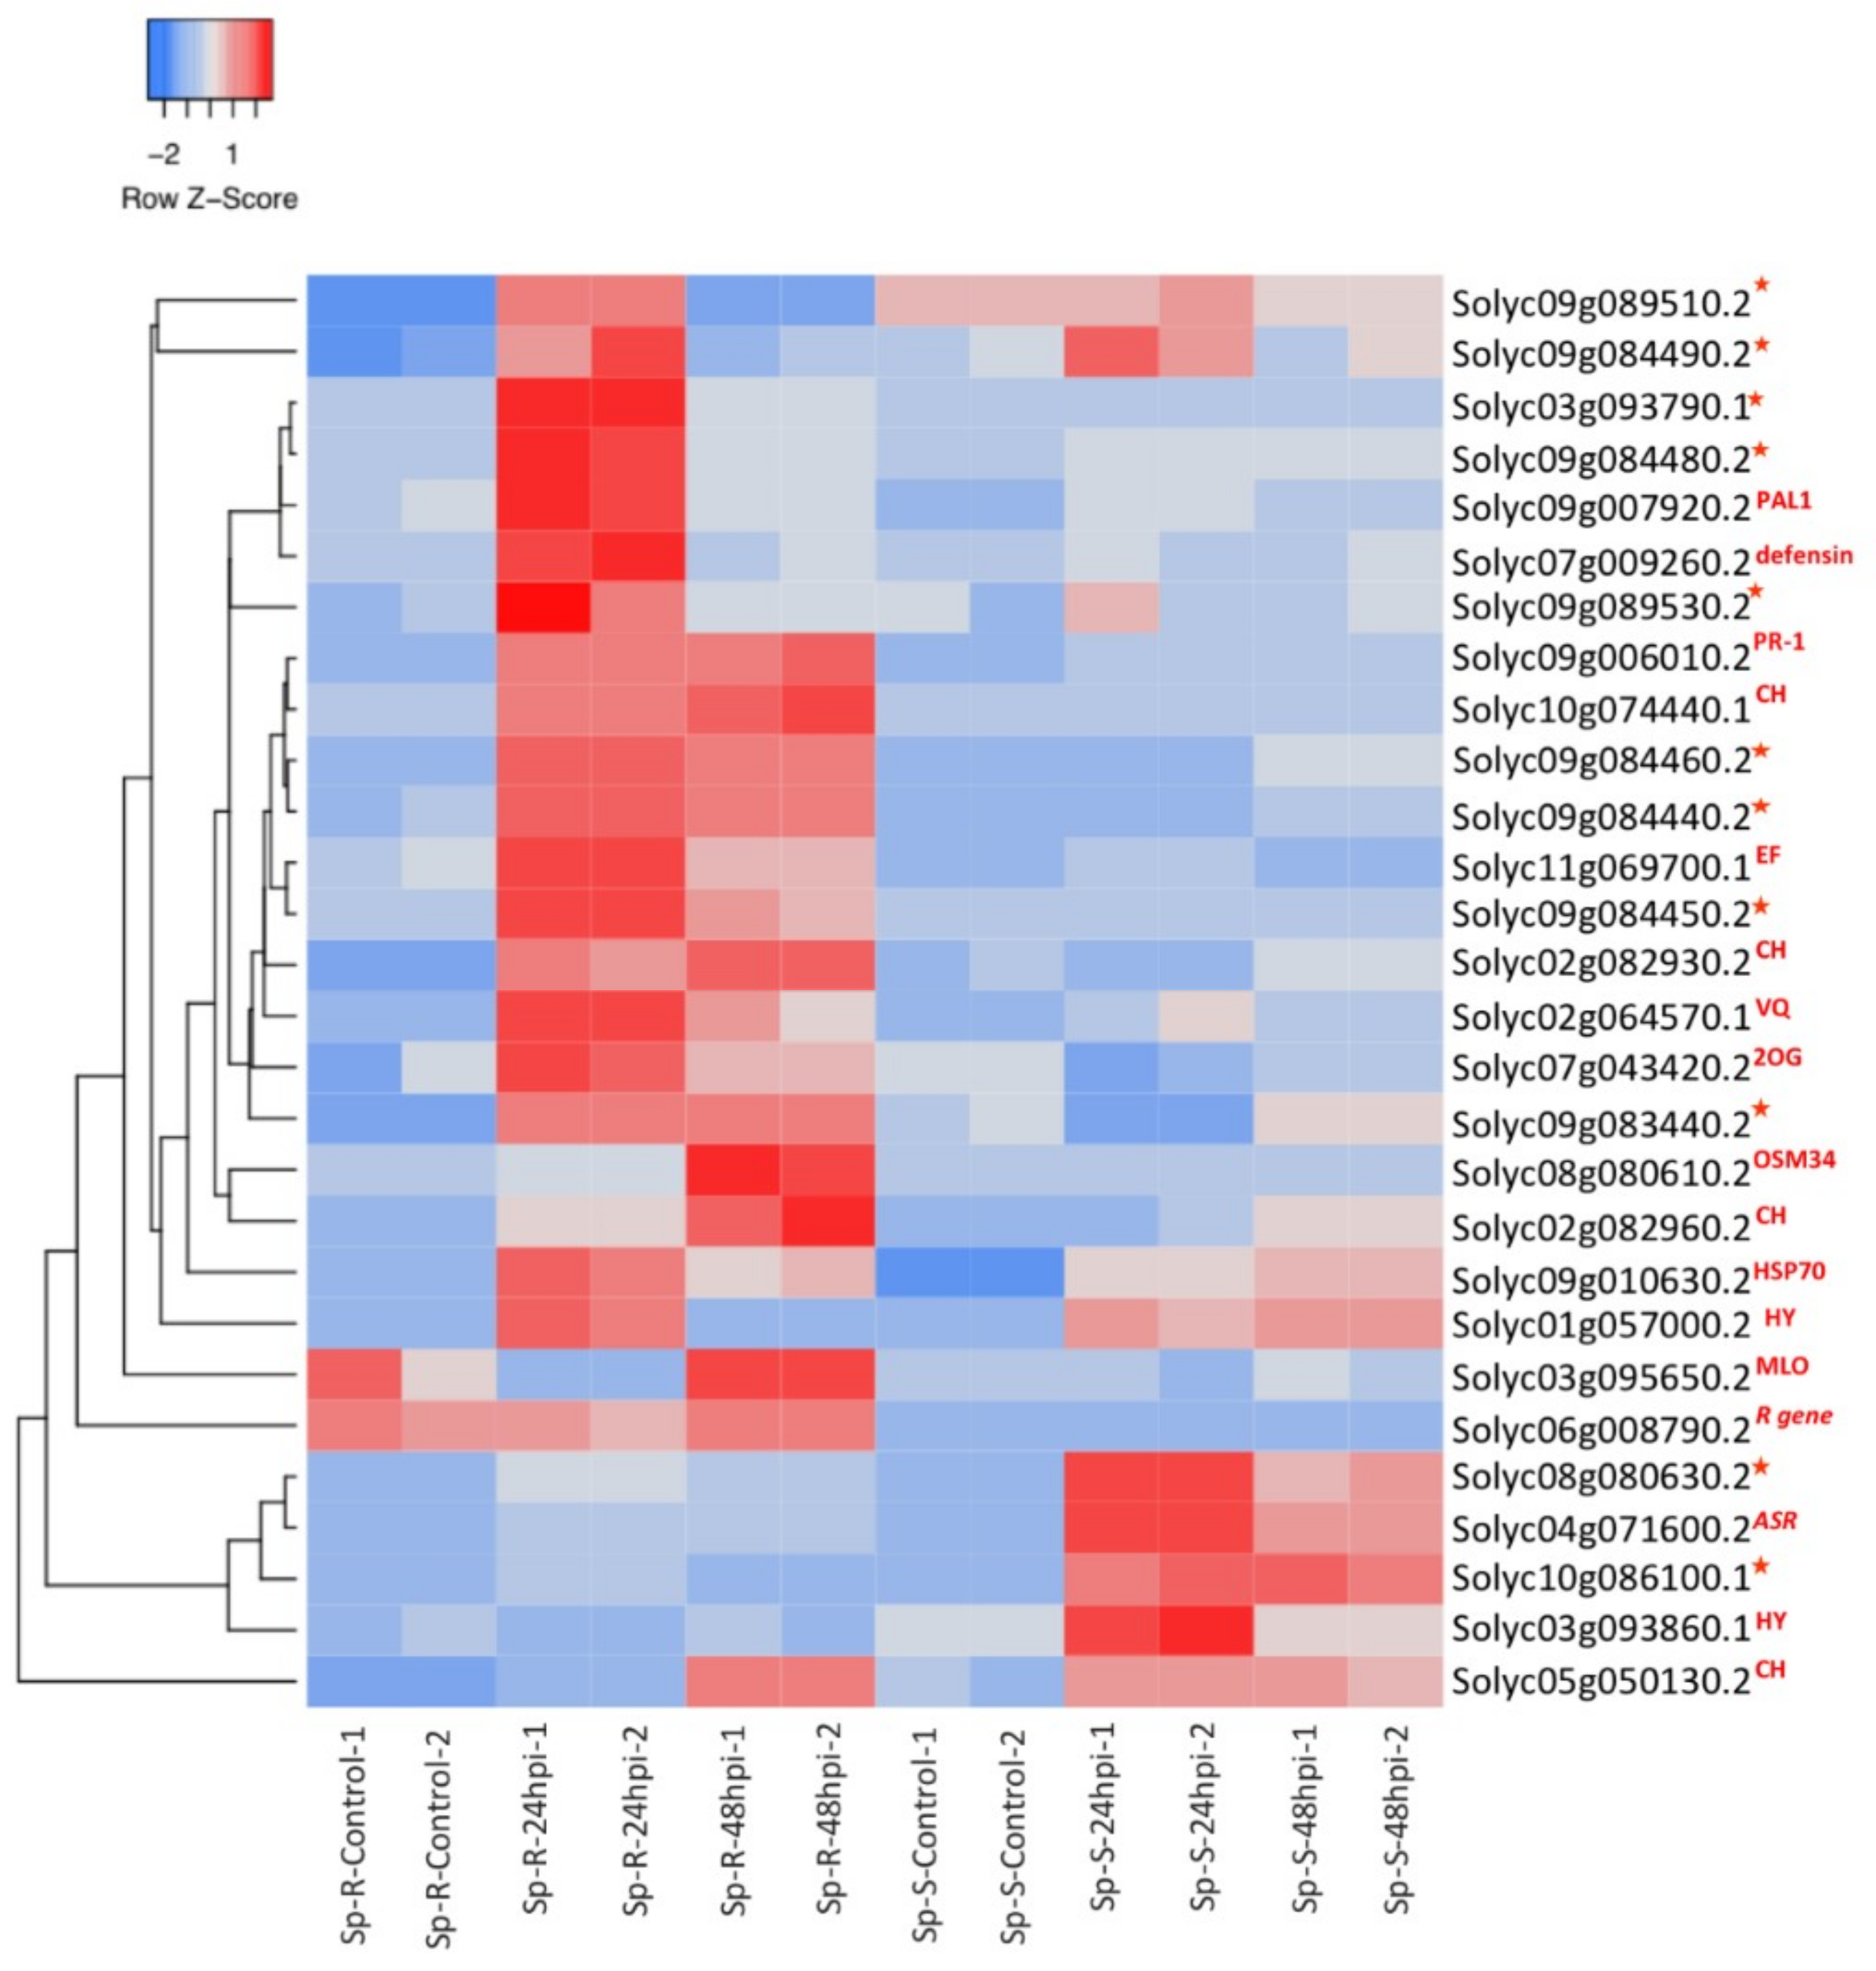 Ijms Free Full Text Comparative Transcriptome Analysis Between A Resistant And A Susceptible Wild Tomato Accession In Response To Phytophthora Parasitica Html